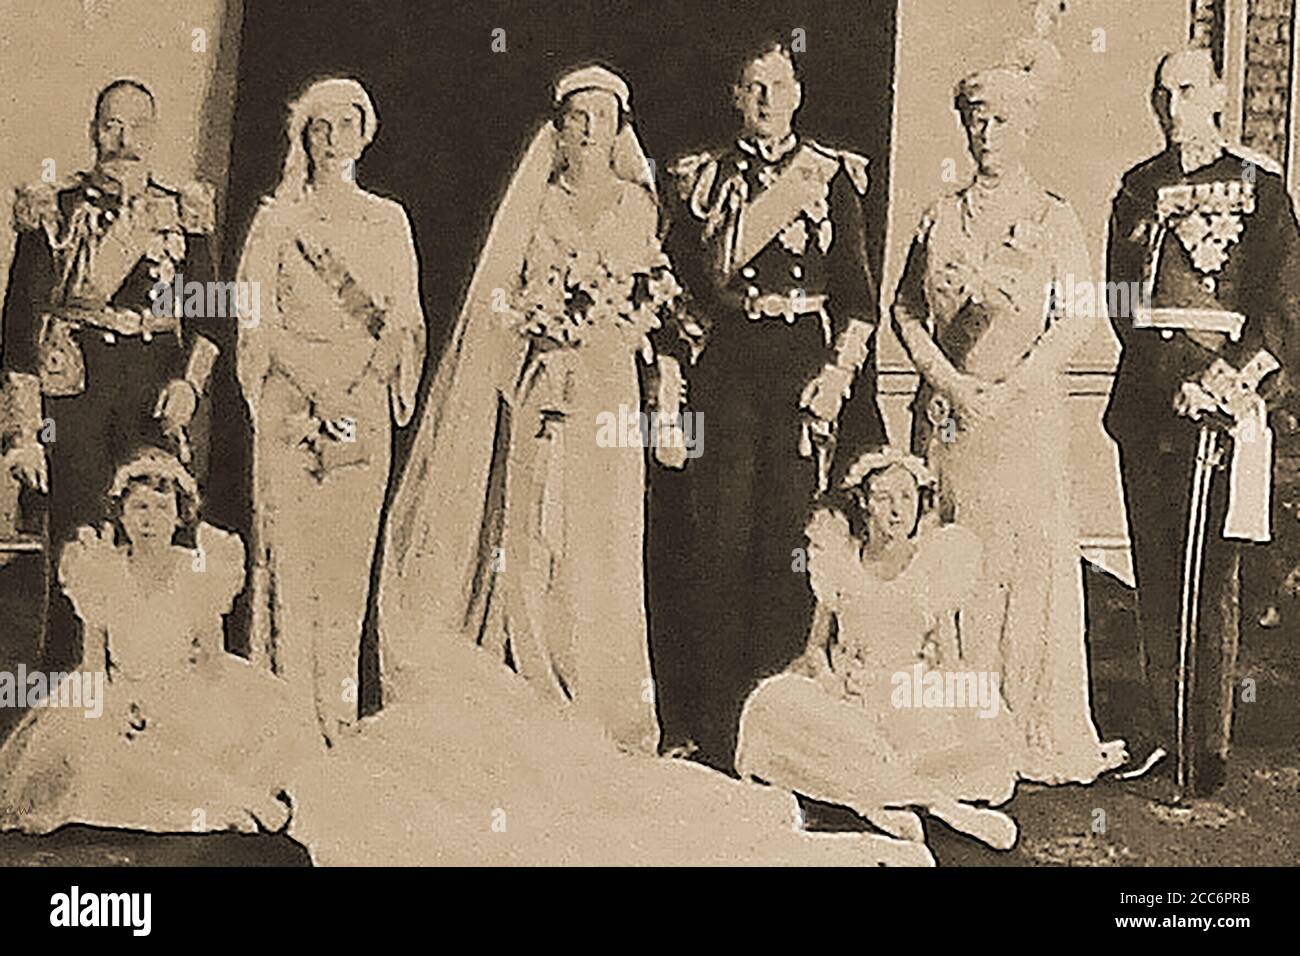 1934 - UK Royal Group portrait at the marriage of Prince George, Duke of Kent & Princess Marina of Greece & Denmark in Westminster Abbey, London.Their wedding was the first royal wedding ceremony to be broadcast by wireless and using microphones and loud speakers. Her dress was designed by designed by Edward Molyneux. Their 1st home was at 3 Belgrave Square.  The Princess was widowed in 1942, when her husband was killed in a plane crash on active service. Stock Photo